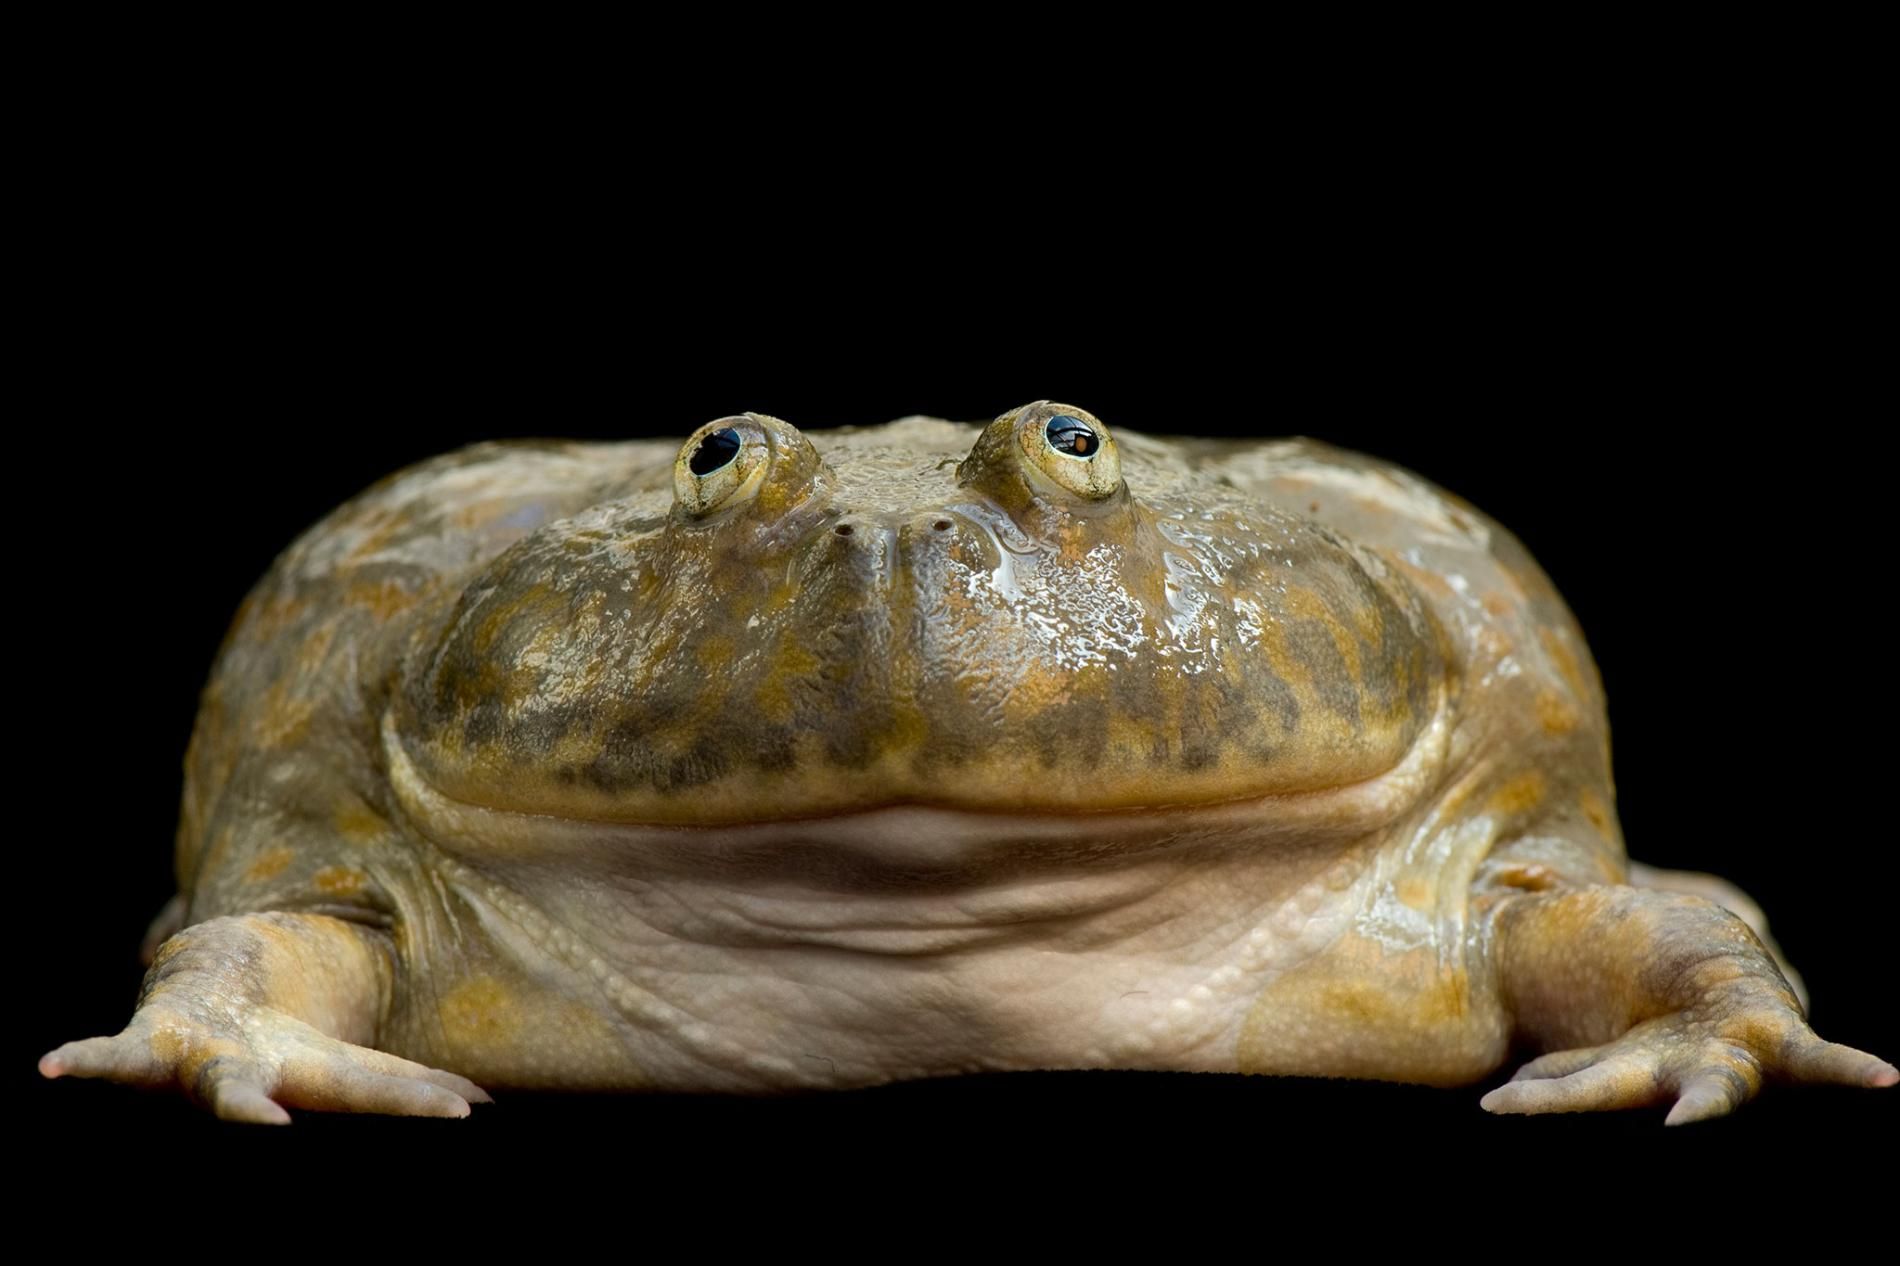 Budgett's Frog (Lep-idobatrachus laevis)-Cute Frog Breeds and Their Stories